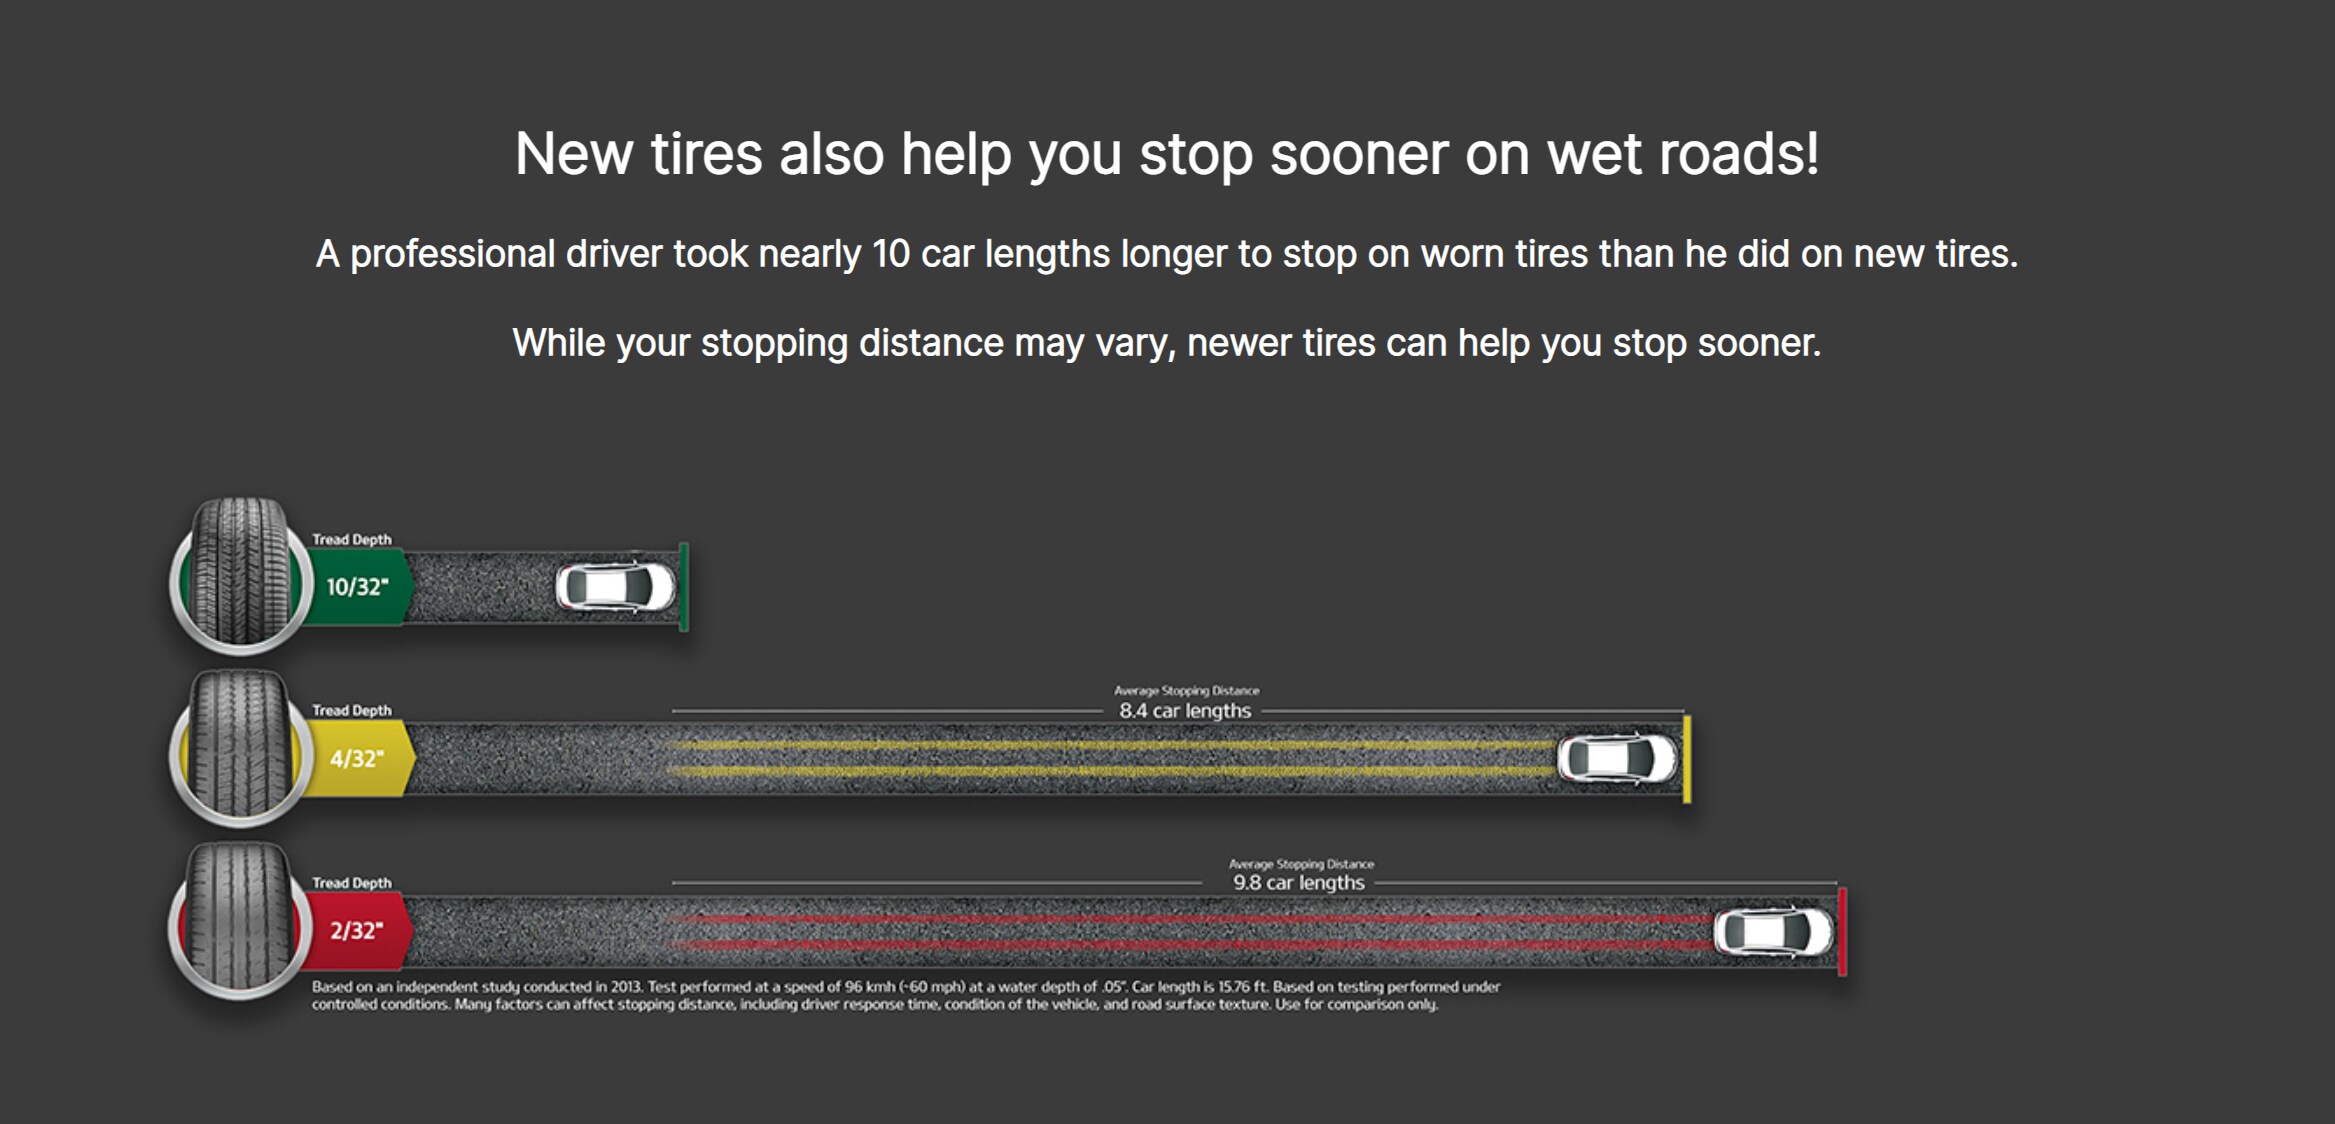 braking distance needed at different tire tread depths